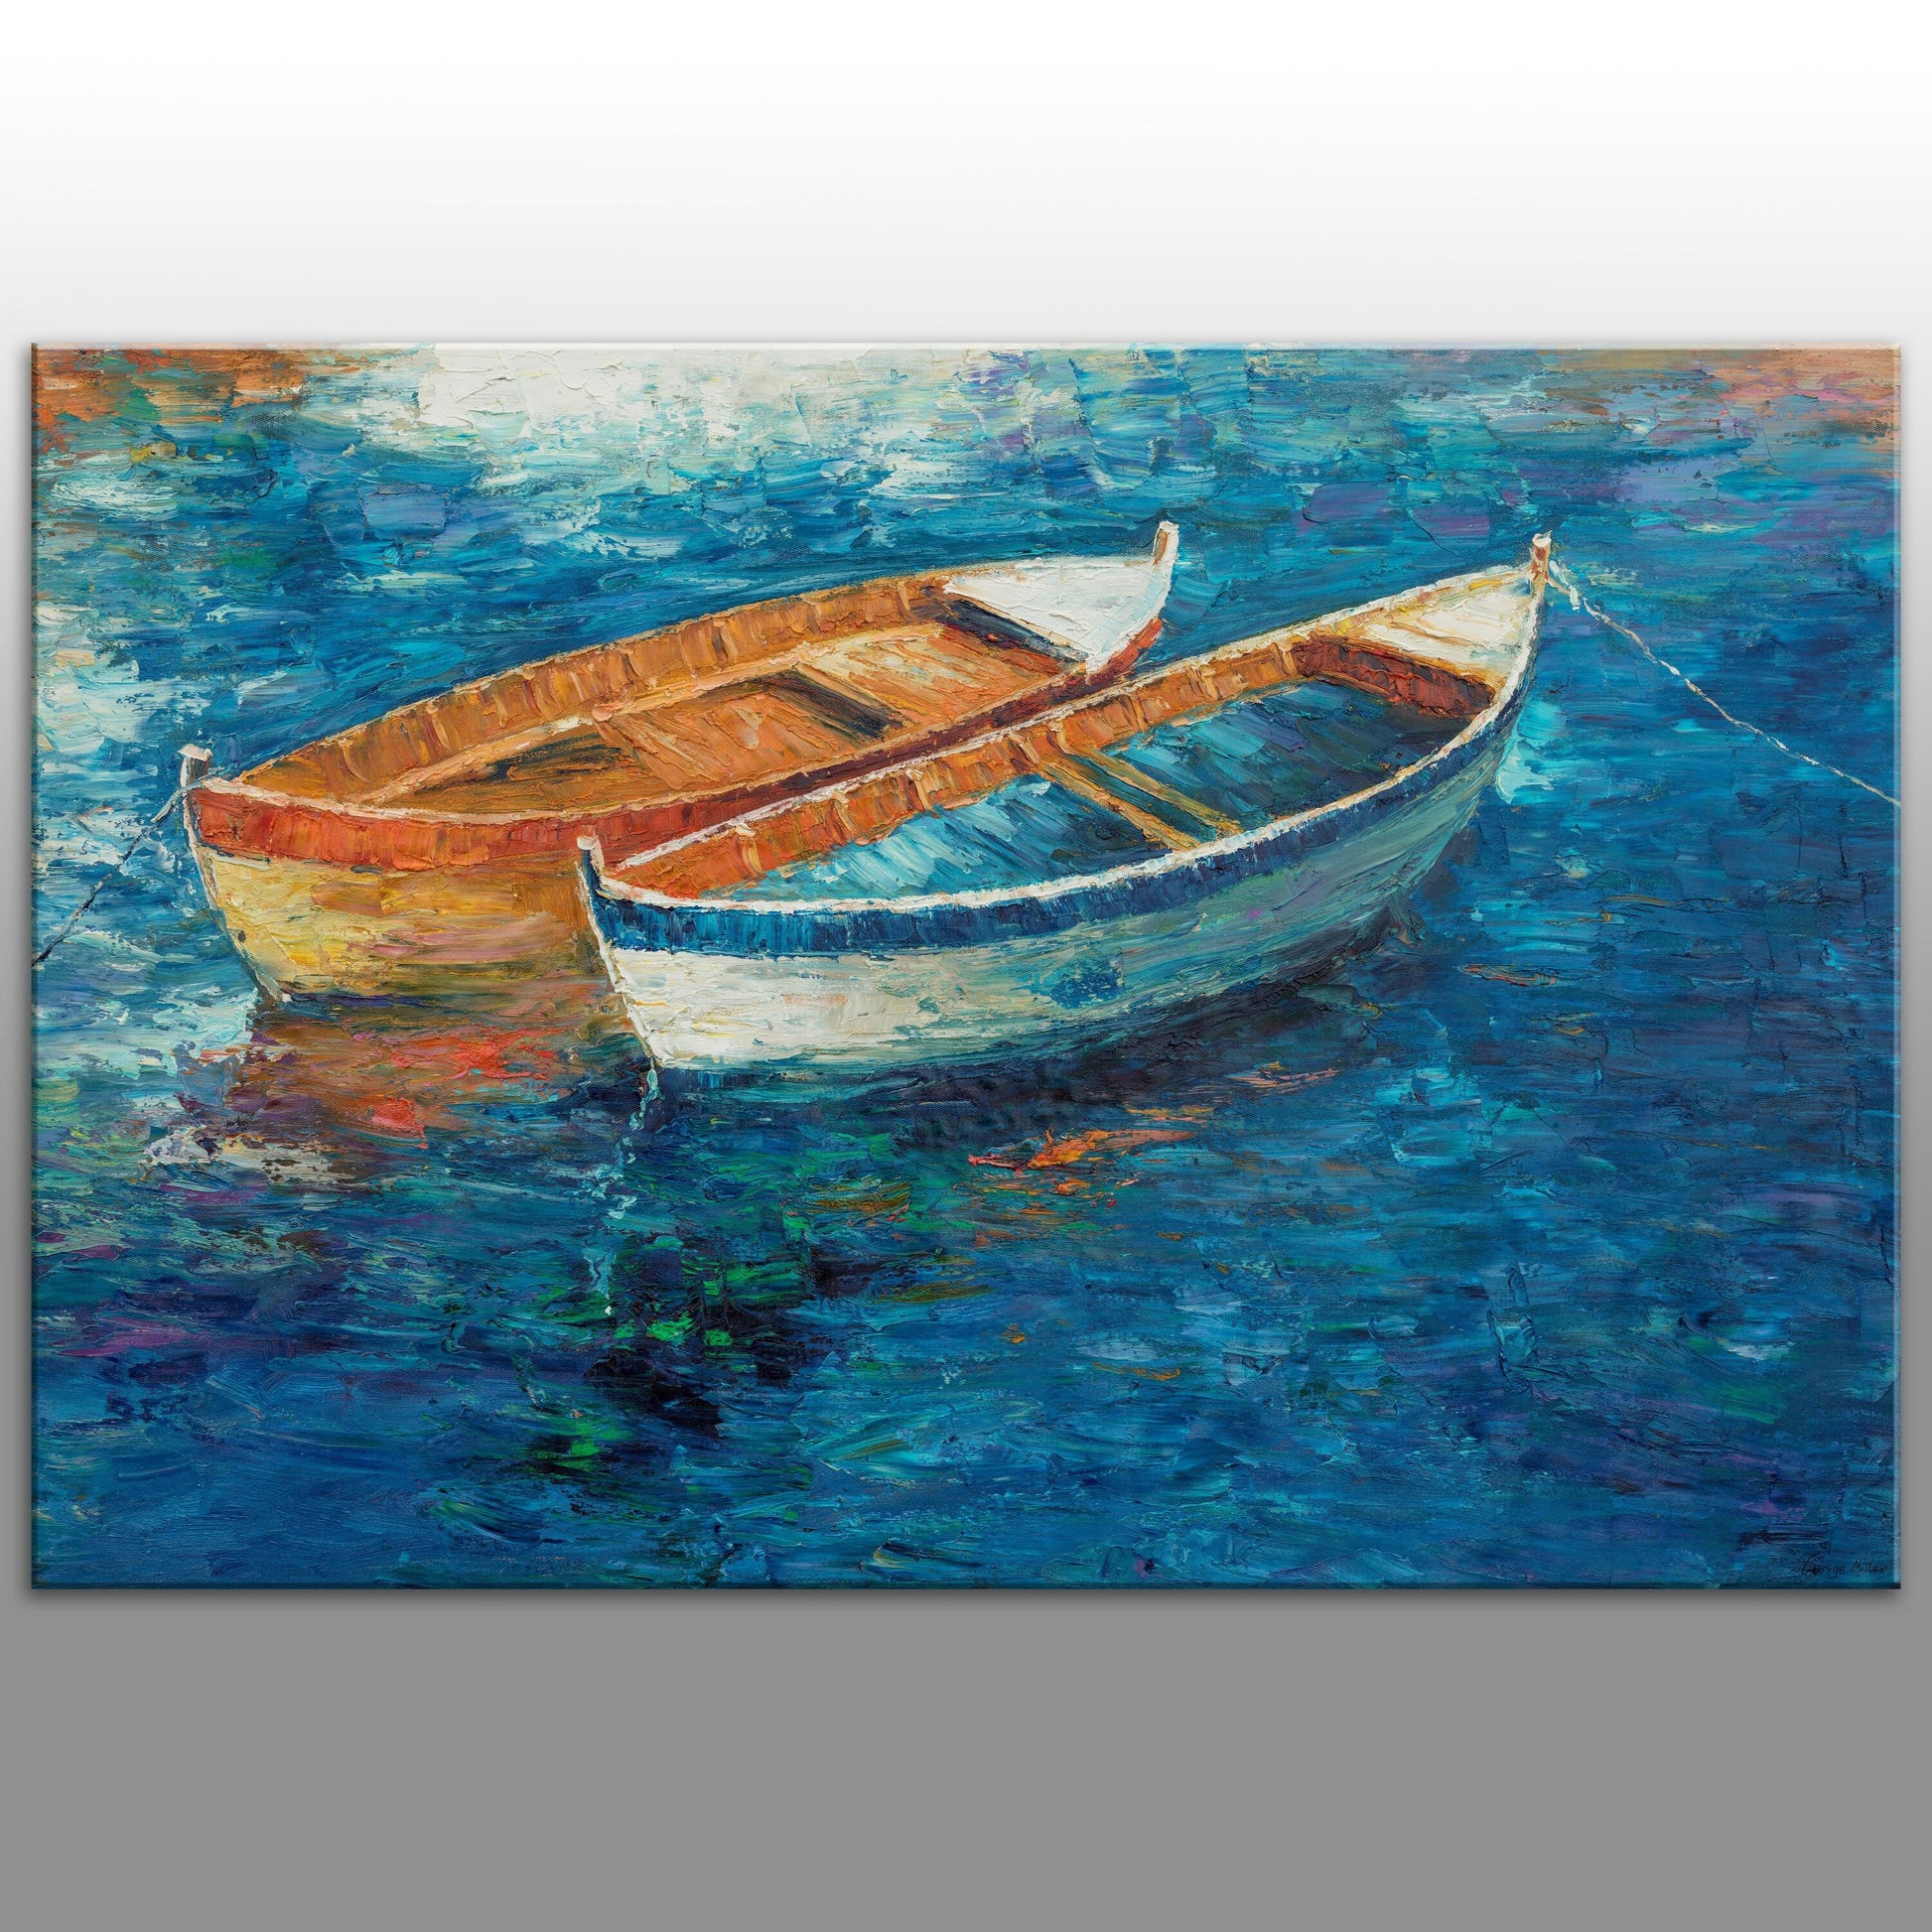 Fishing Boat Seascape: Large Abstract Oil Painting